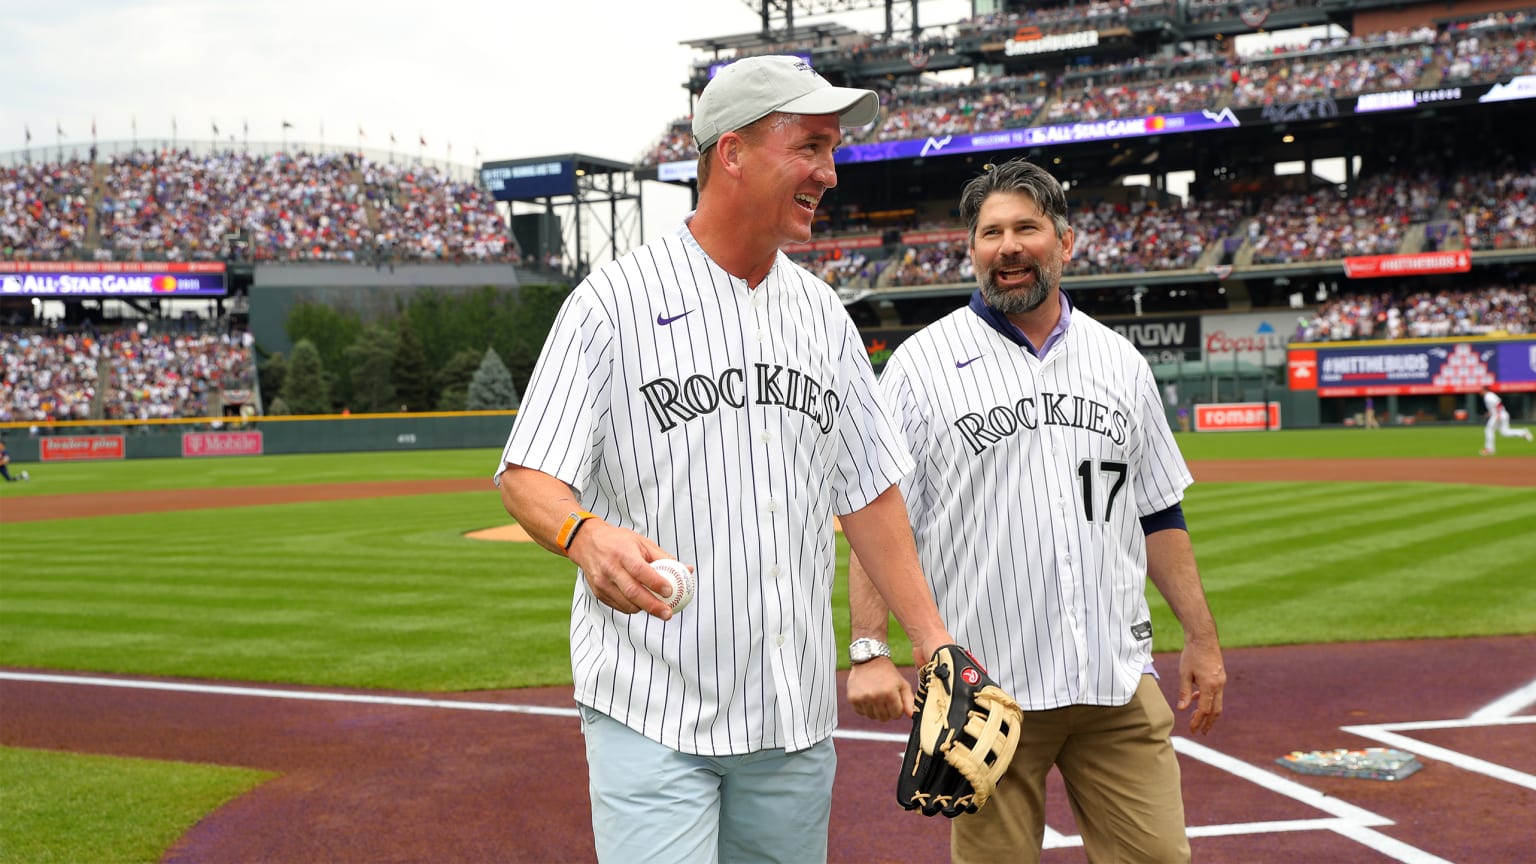 Peyton Manning and Todd Helton together on field at Coors Field